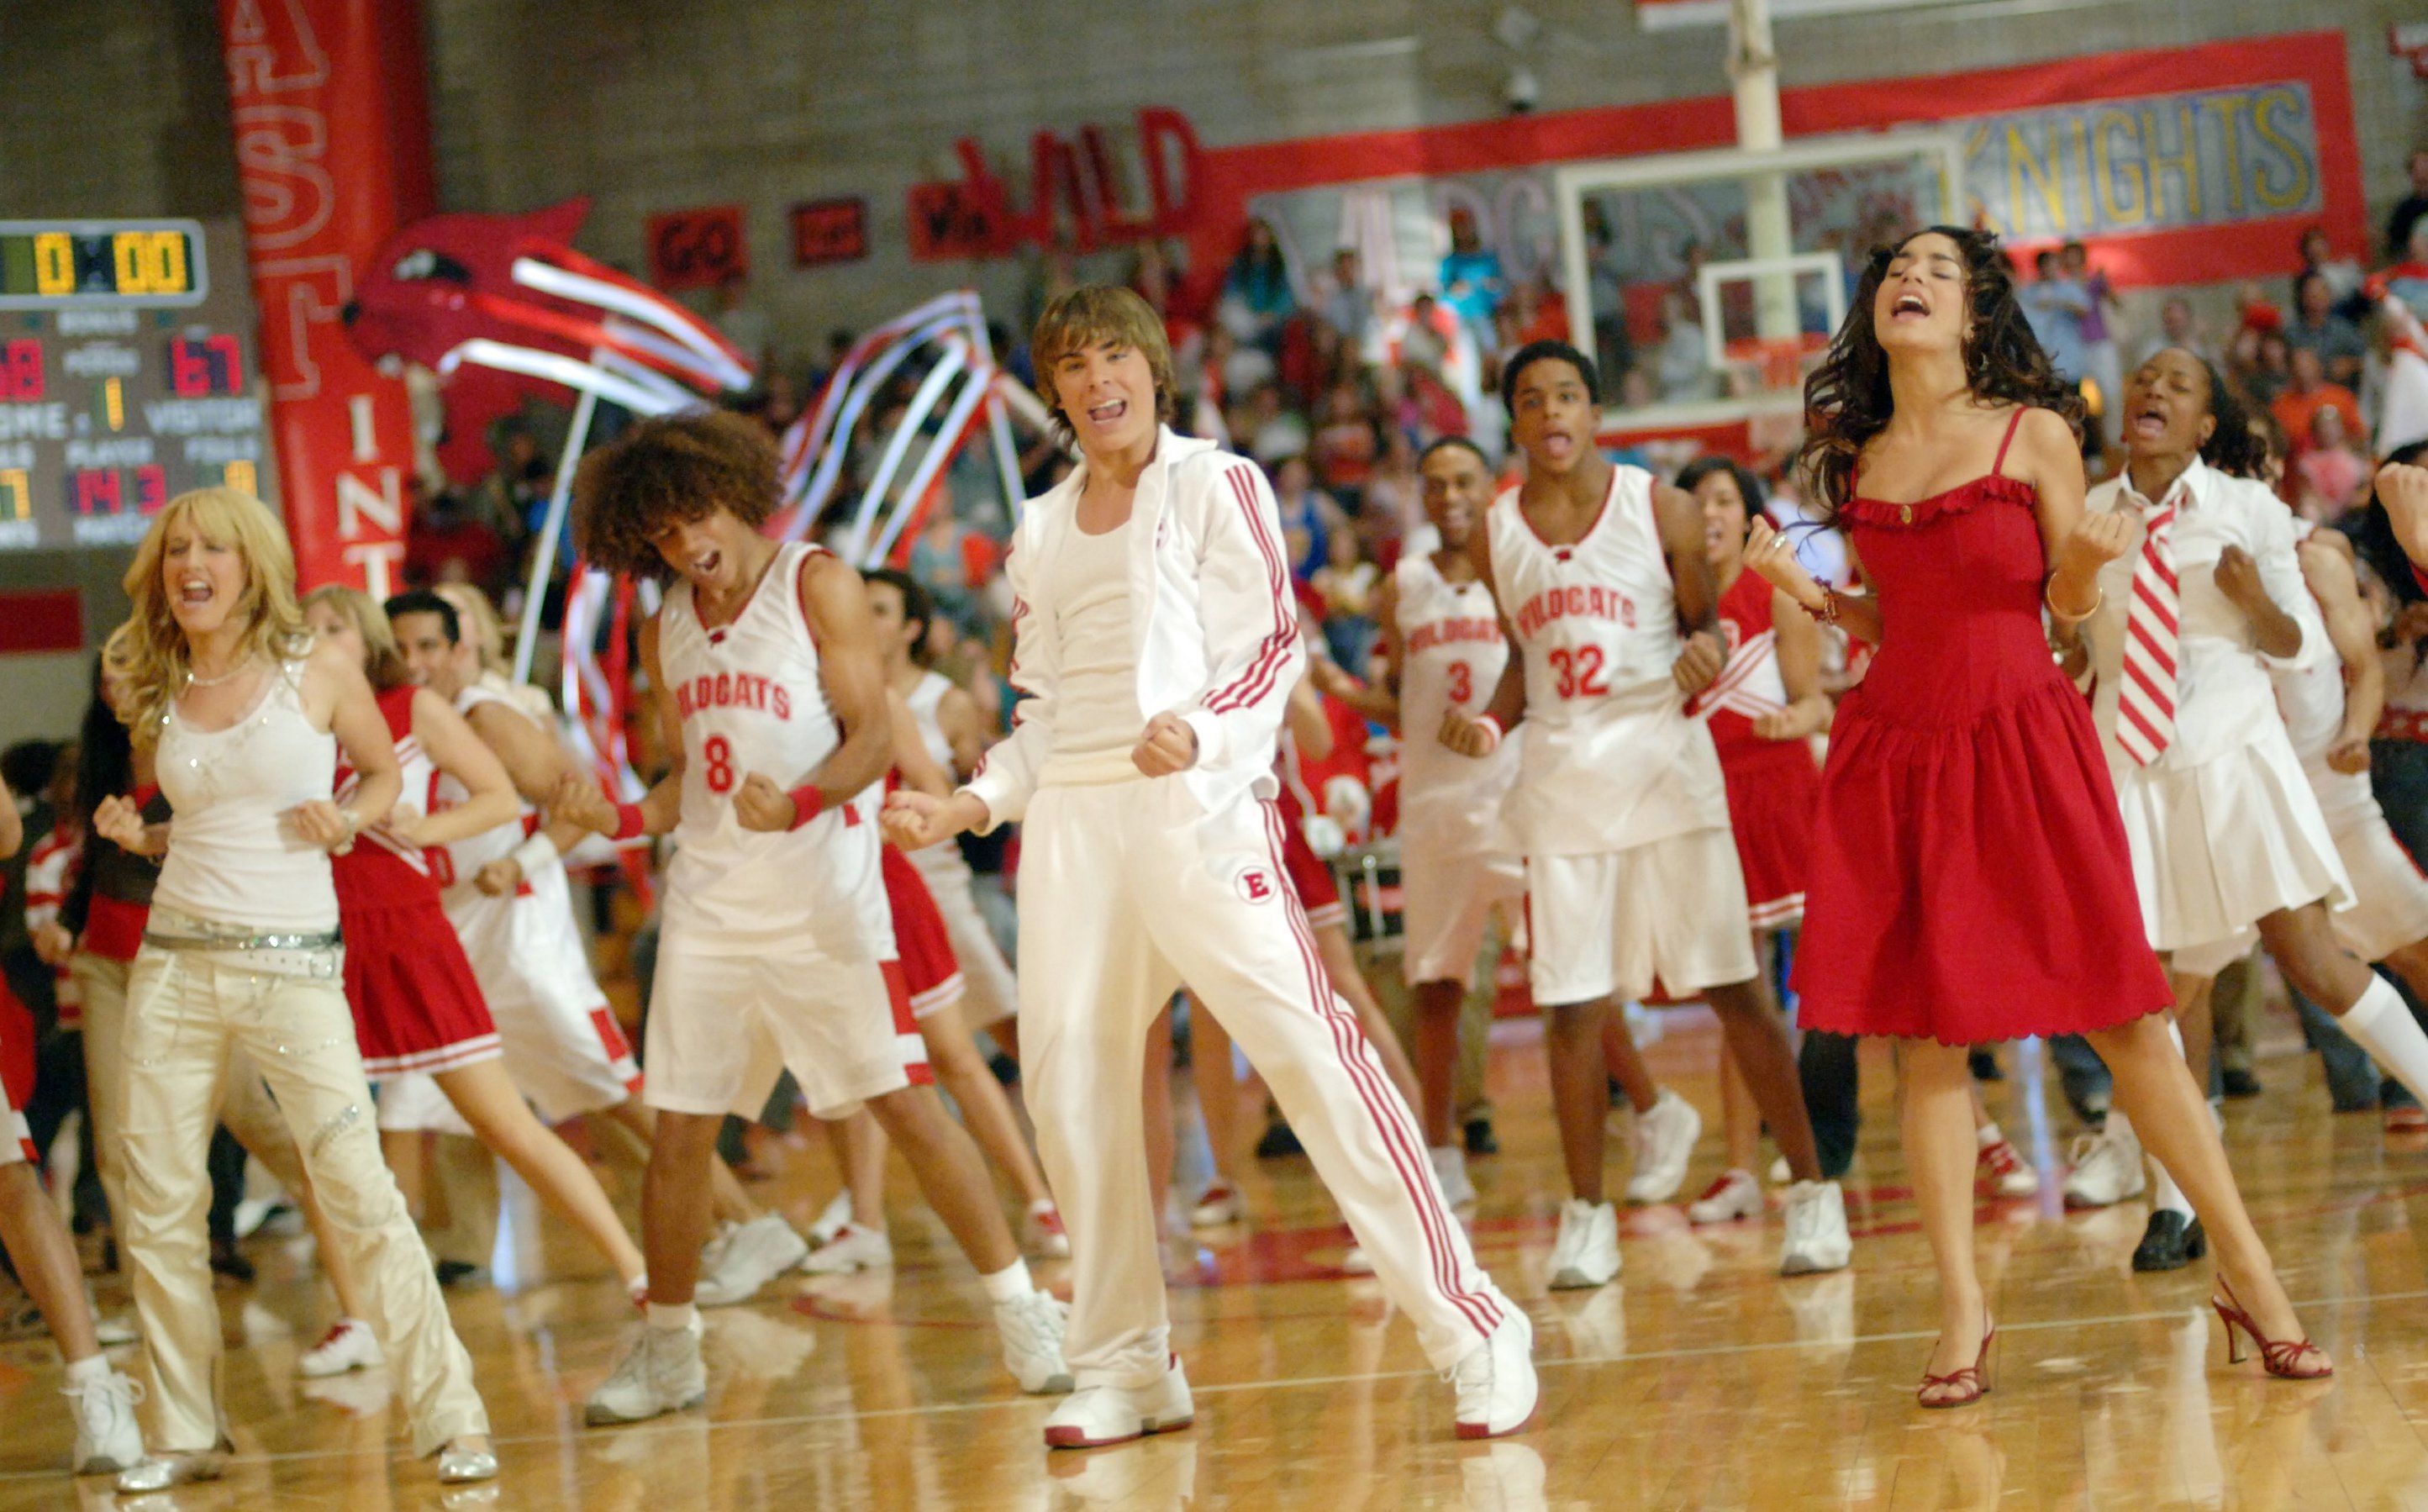 High School Musical' Cast: What the Disney Stars Are Doing Now